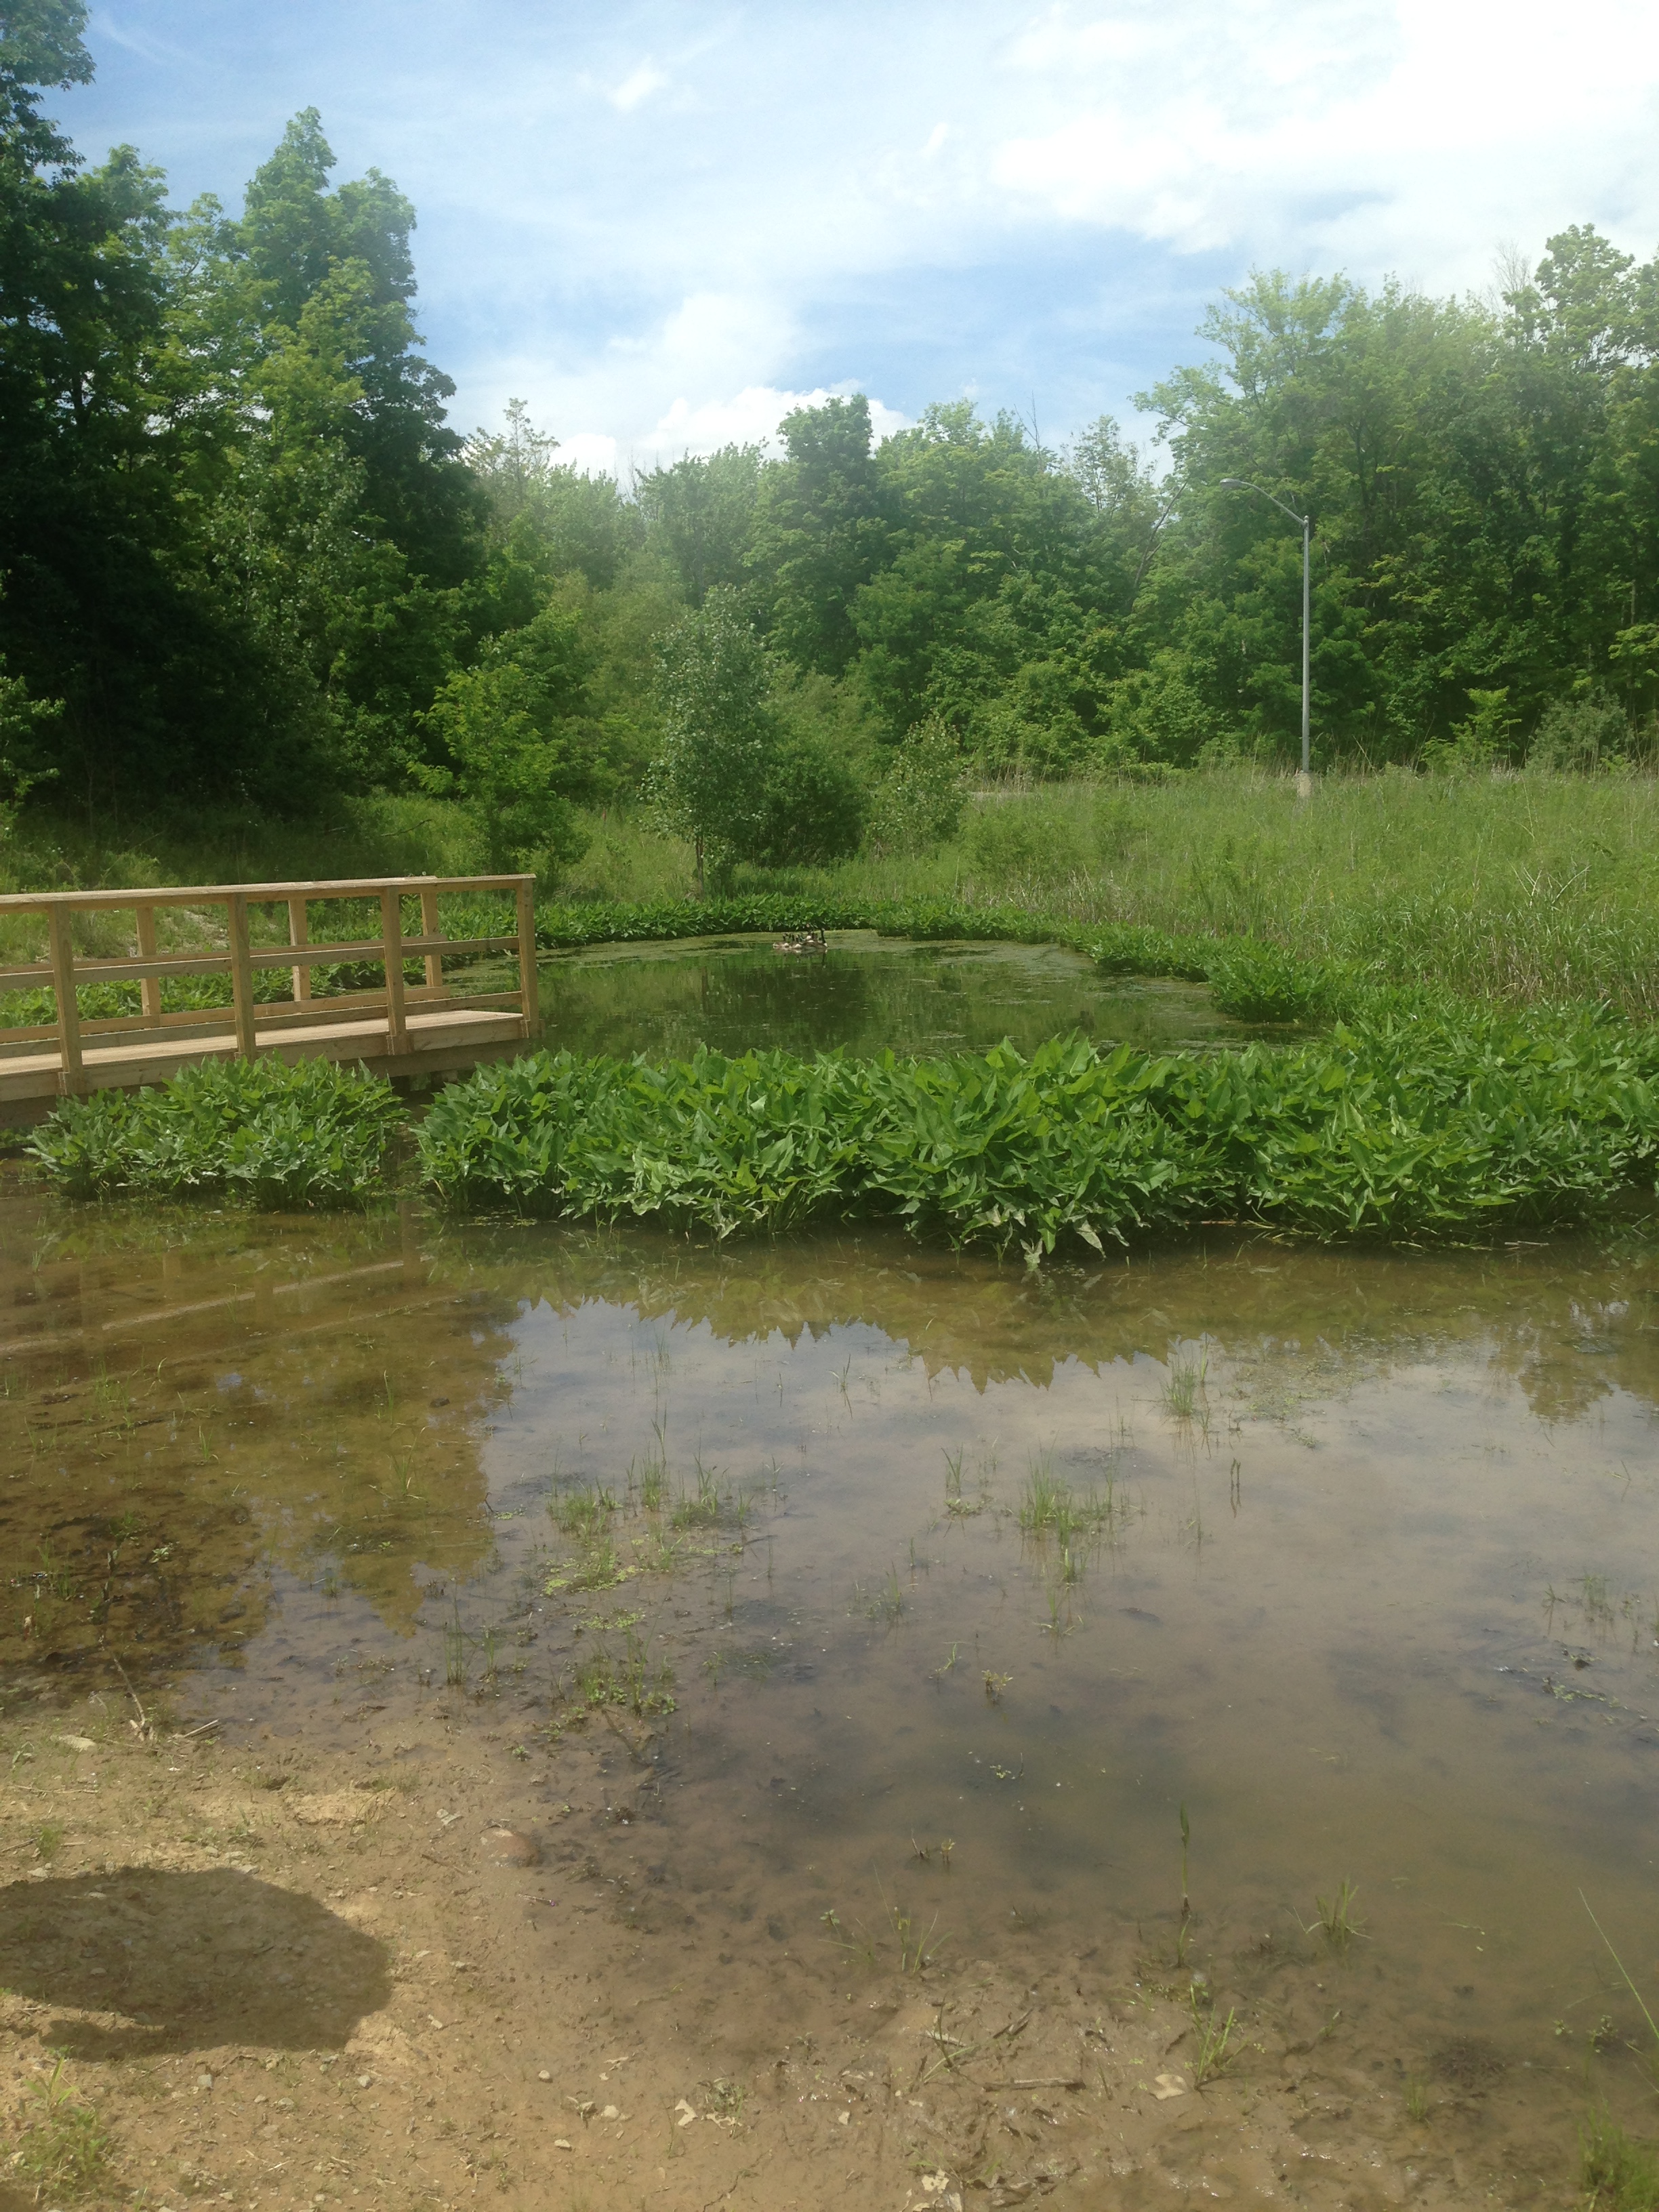 This wetland is a part of an outdoor classroom at Ohio State's Mansfield Campus.